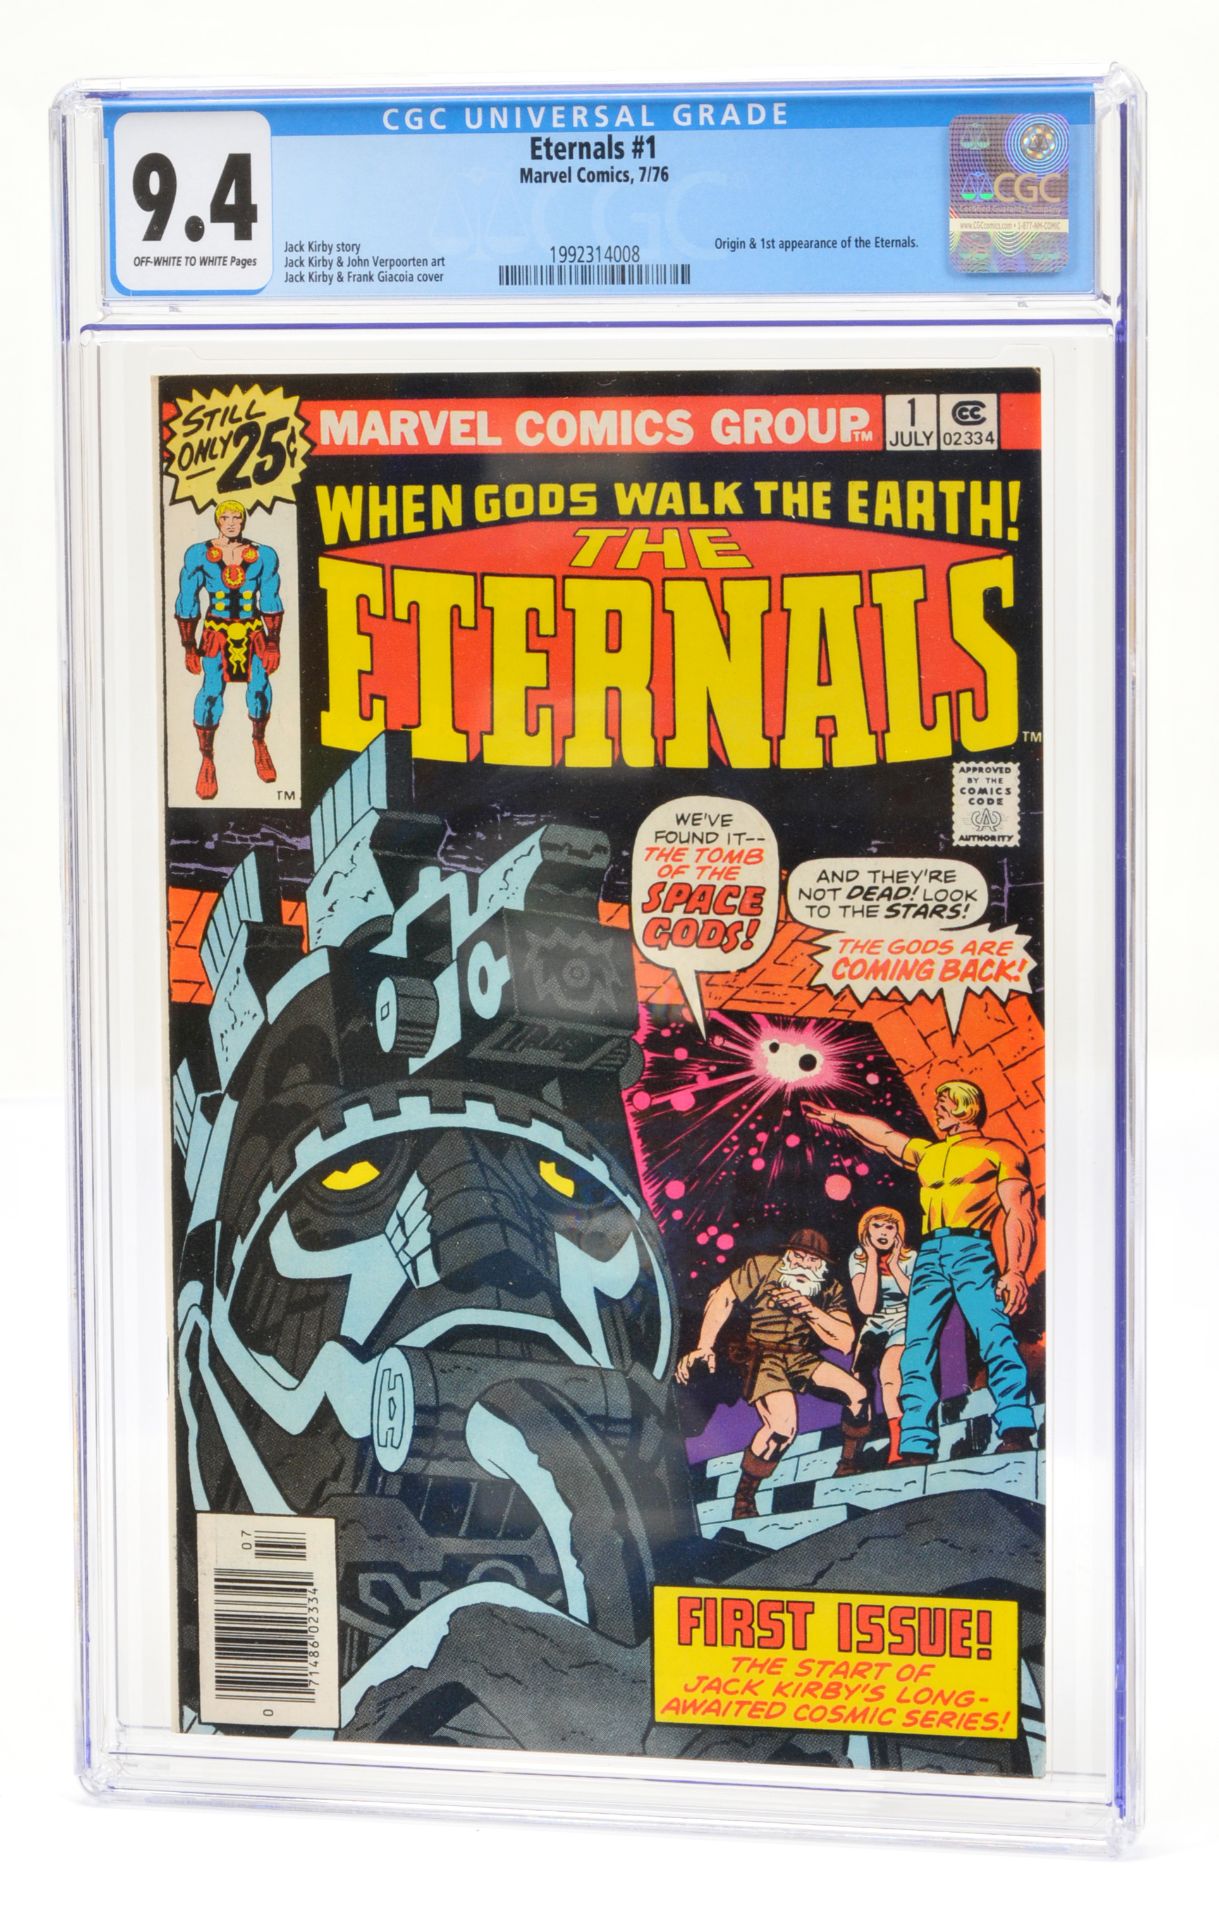 Marvel Comics Eternals #1 CGC Universal Grade 9.4 (Off White to White Pages)